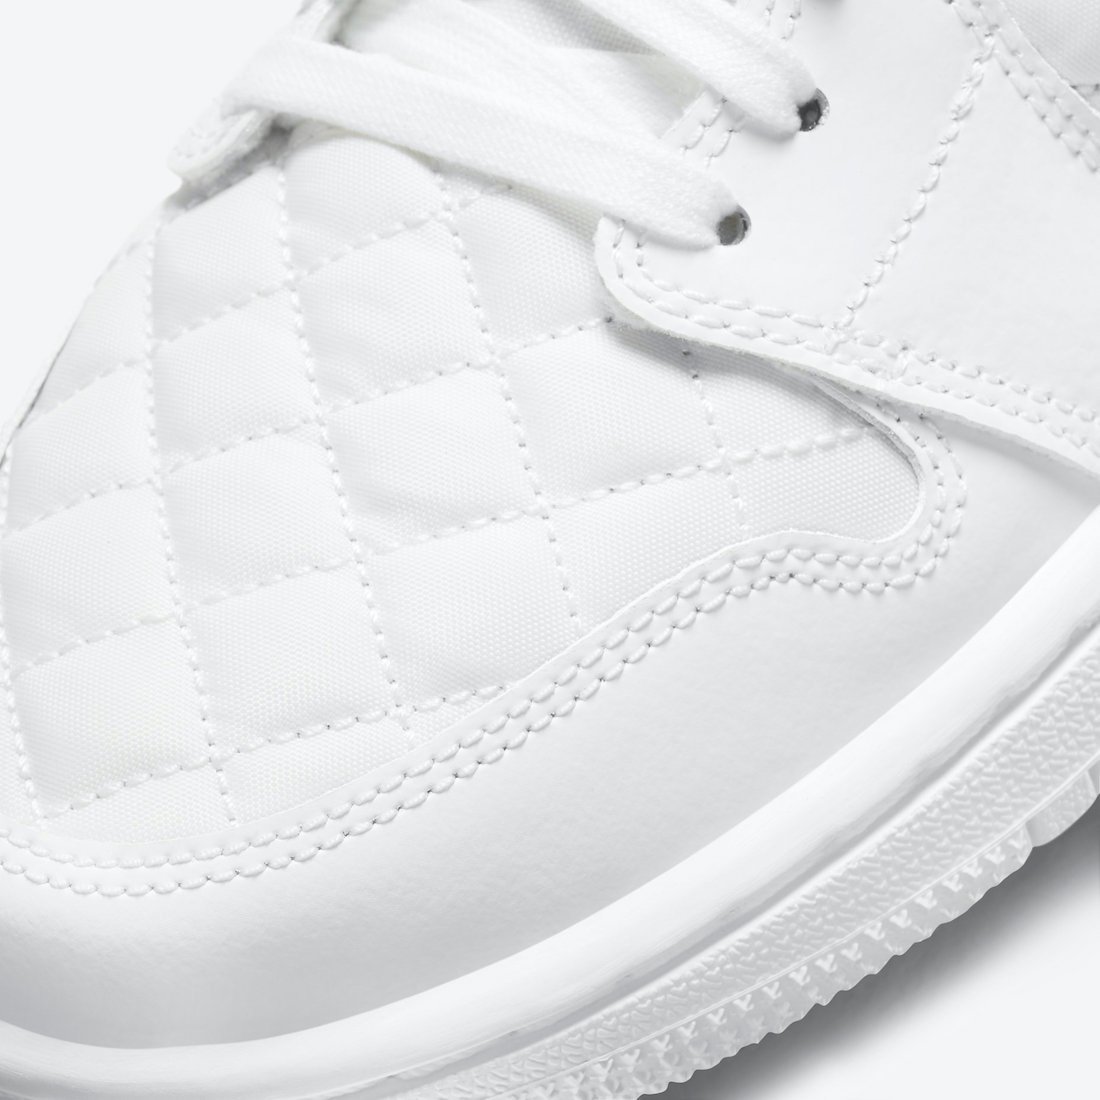 Air Jordan 1 Mid White Quilted DB6078-100 Release Date Info